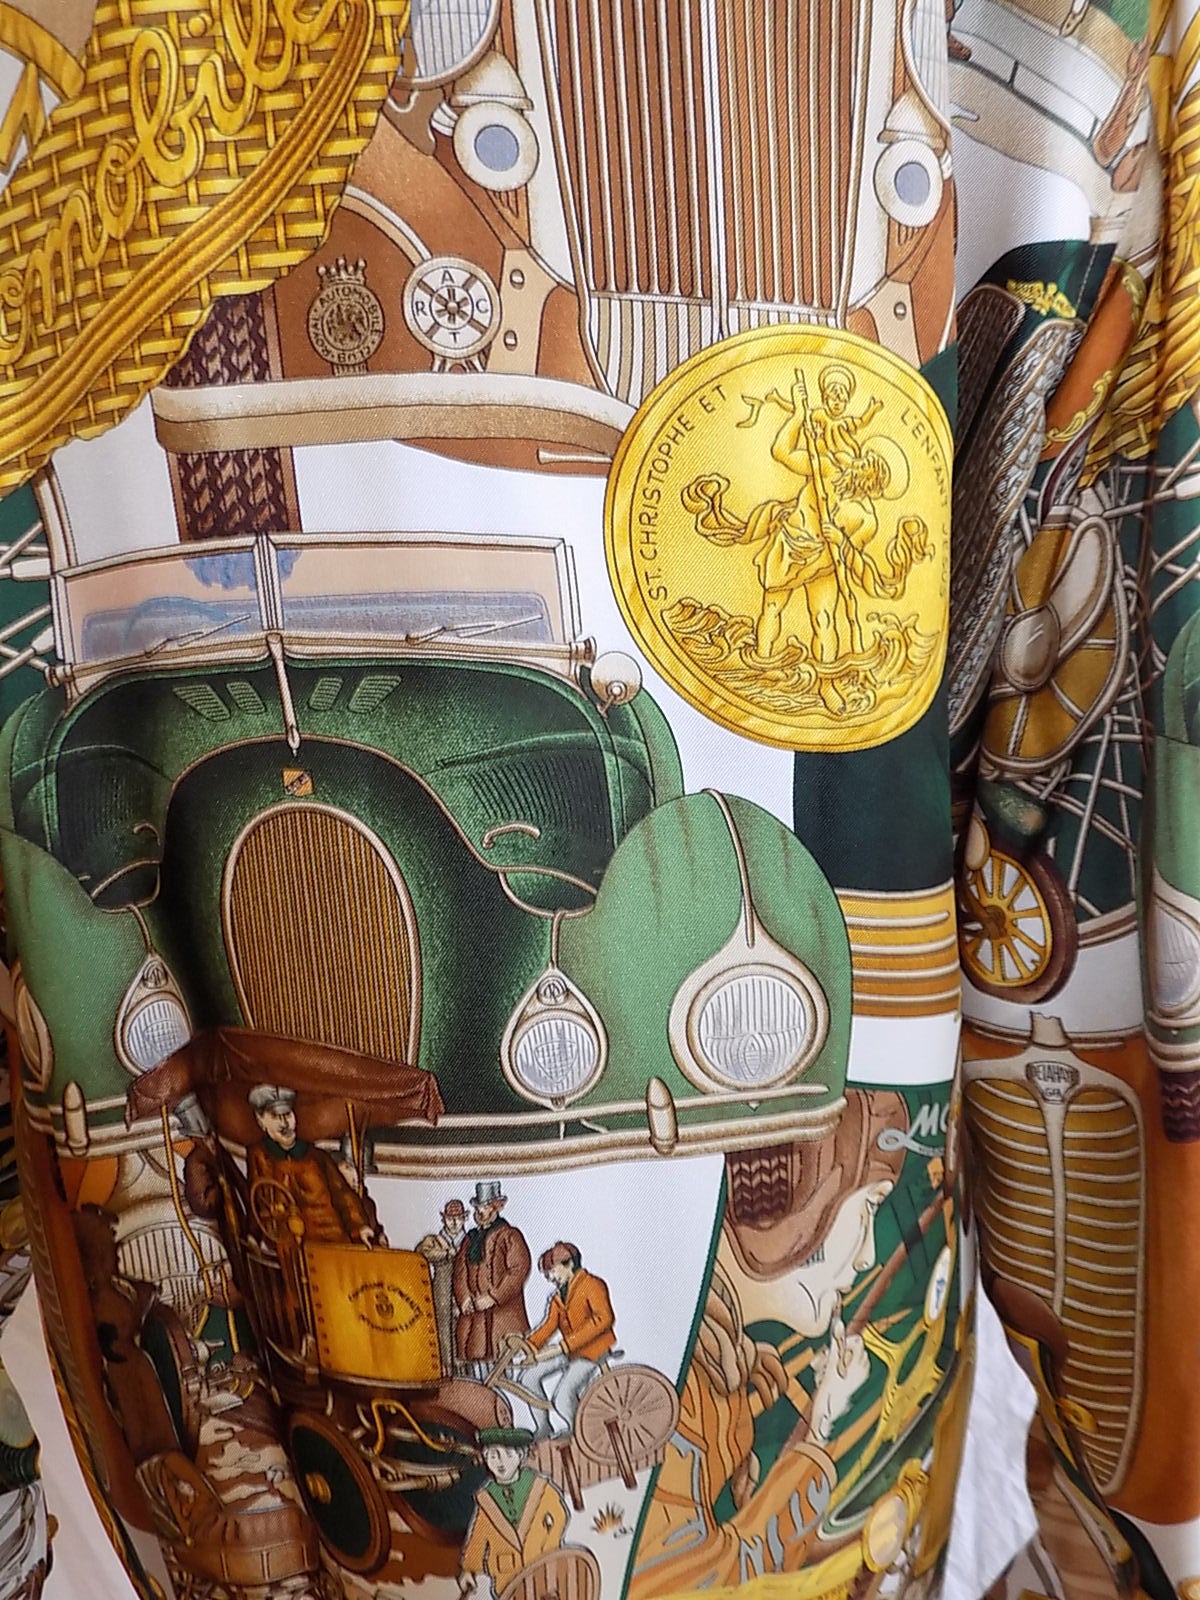 New with tags !Hermès silk shirt  AUTOMOBILE designed by Joachim Metz The shirt  is rather rare, because it has not been re-issued since 1996. If you are a vintage car enthusiast, this  is a MUST!
Have you ever been to Pebble Beach and seen all